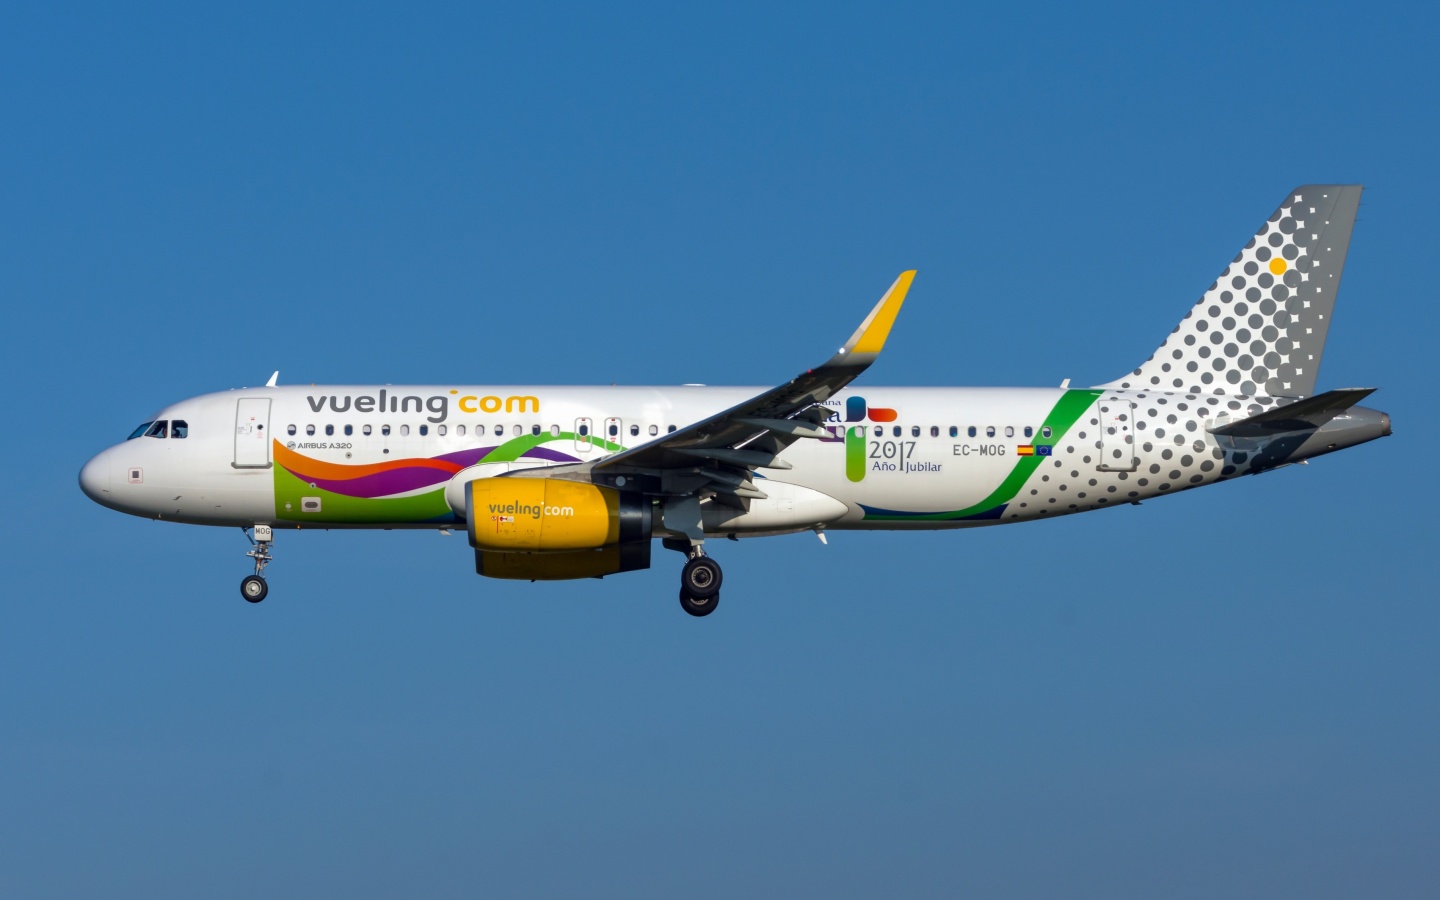 Airbus A320 Vueling Airlines wallpaper 1440x900